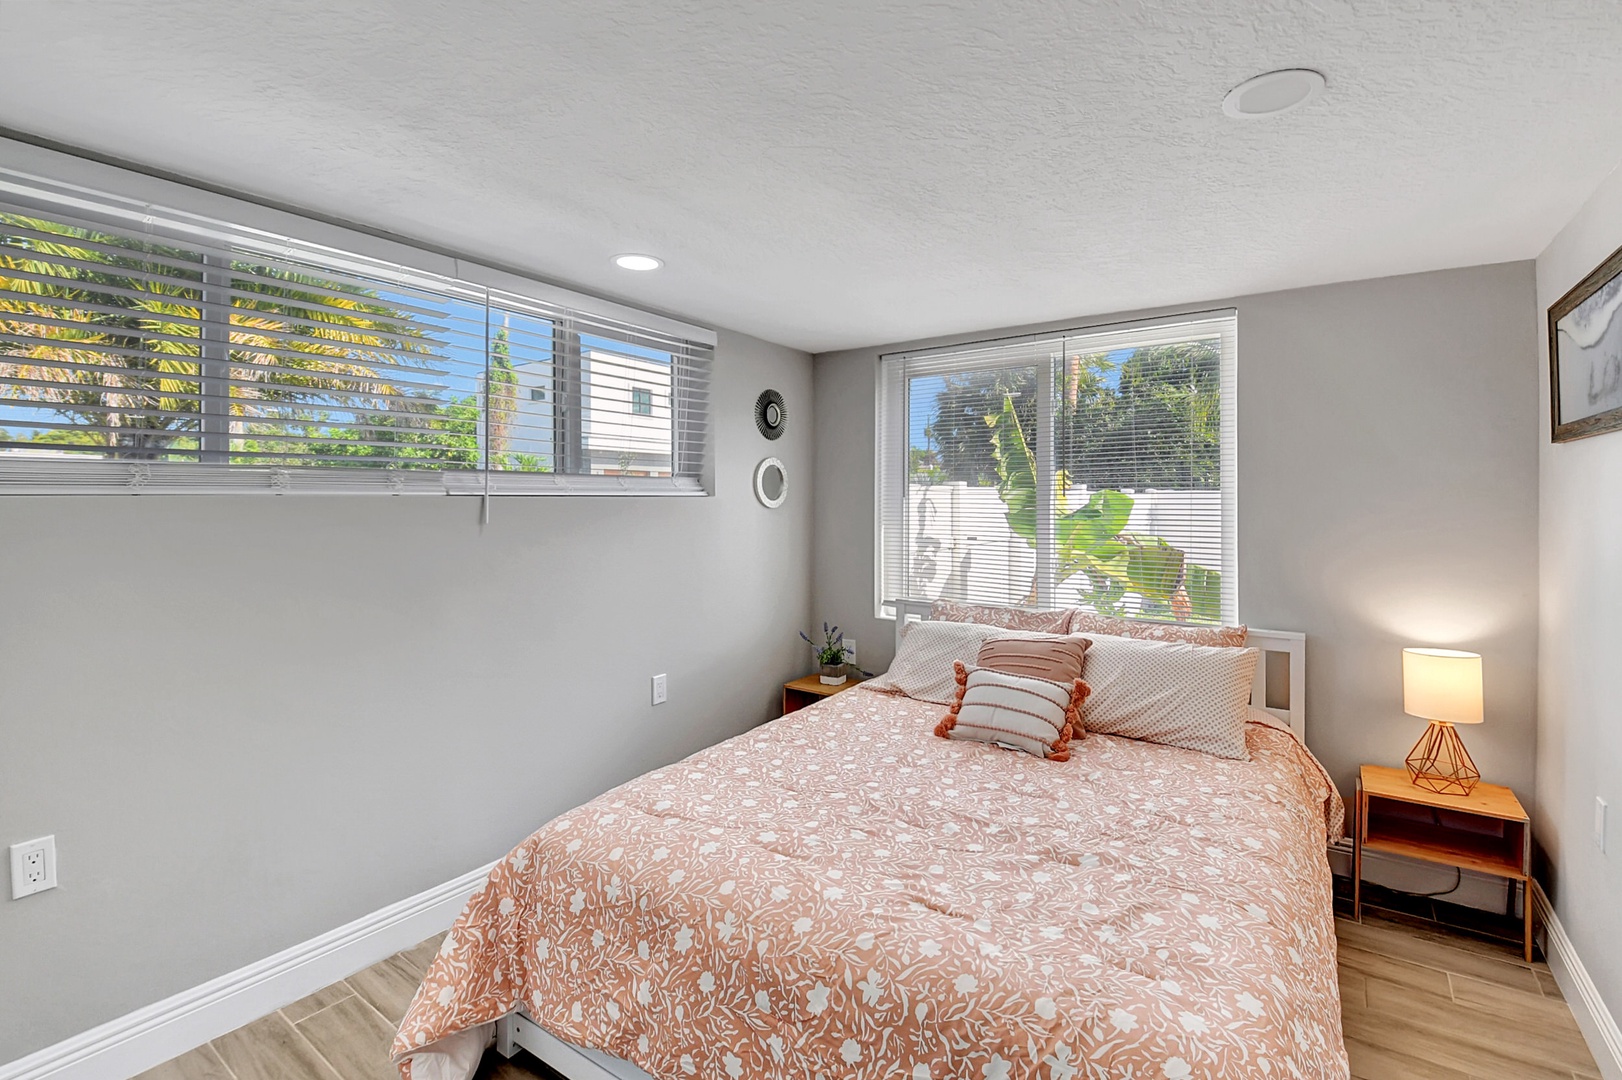 Main House - The final bedroom offers a comfortable queen bed & ample closet space